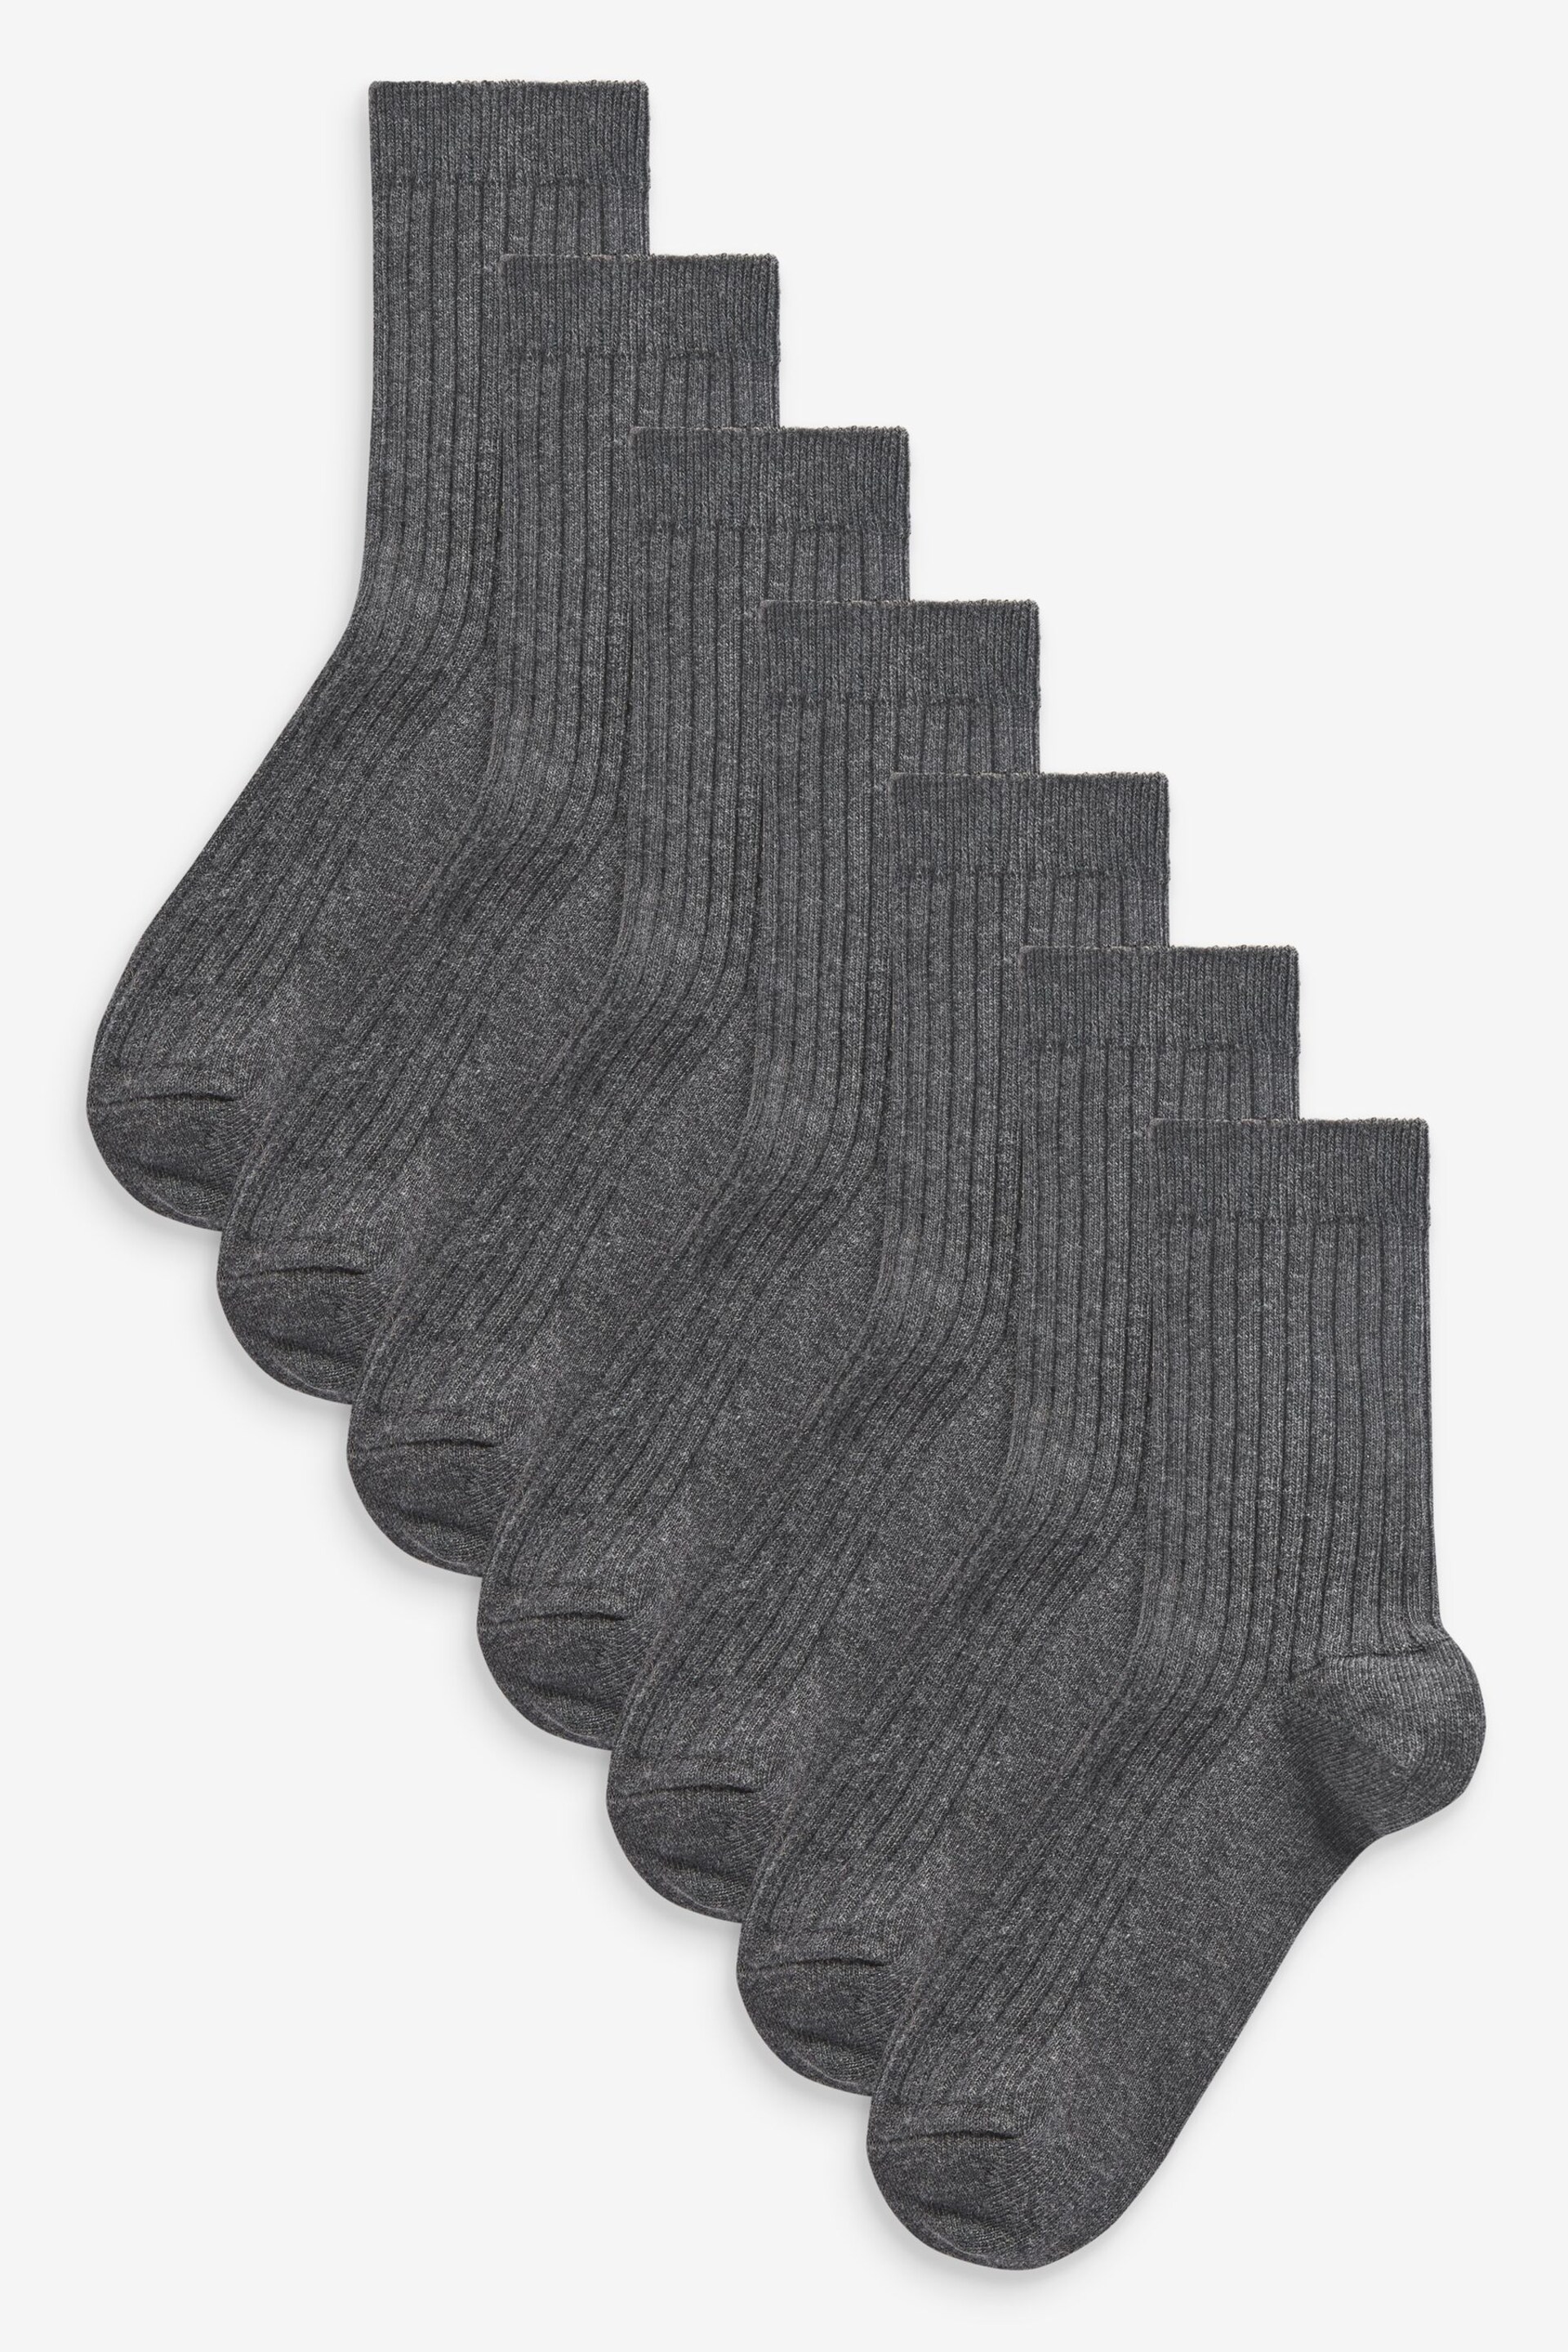 Mid Grey 7 Pack Ribbed Cotton Rich Socks - Image 1 of 2